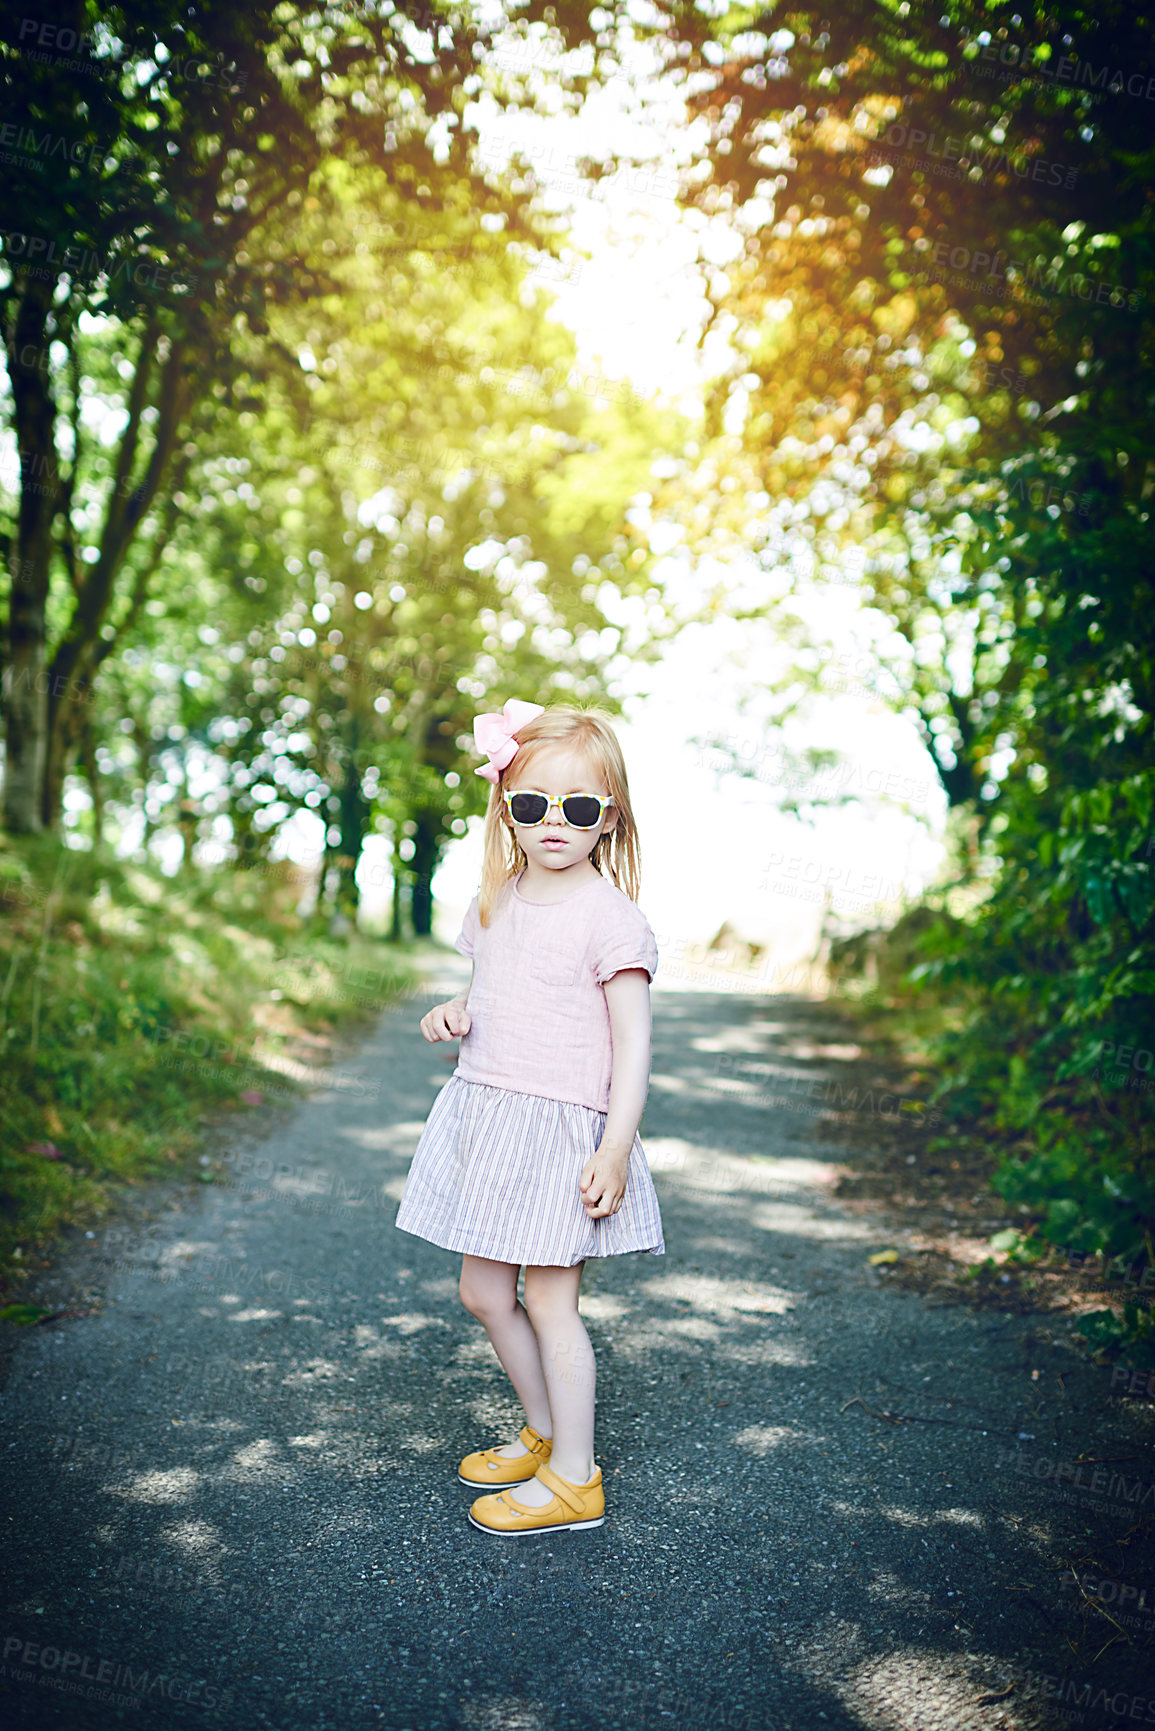 Buy stock photo Portrait of an adorable little girl standing outdoors